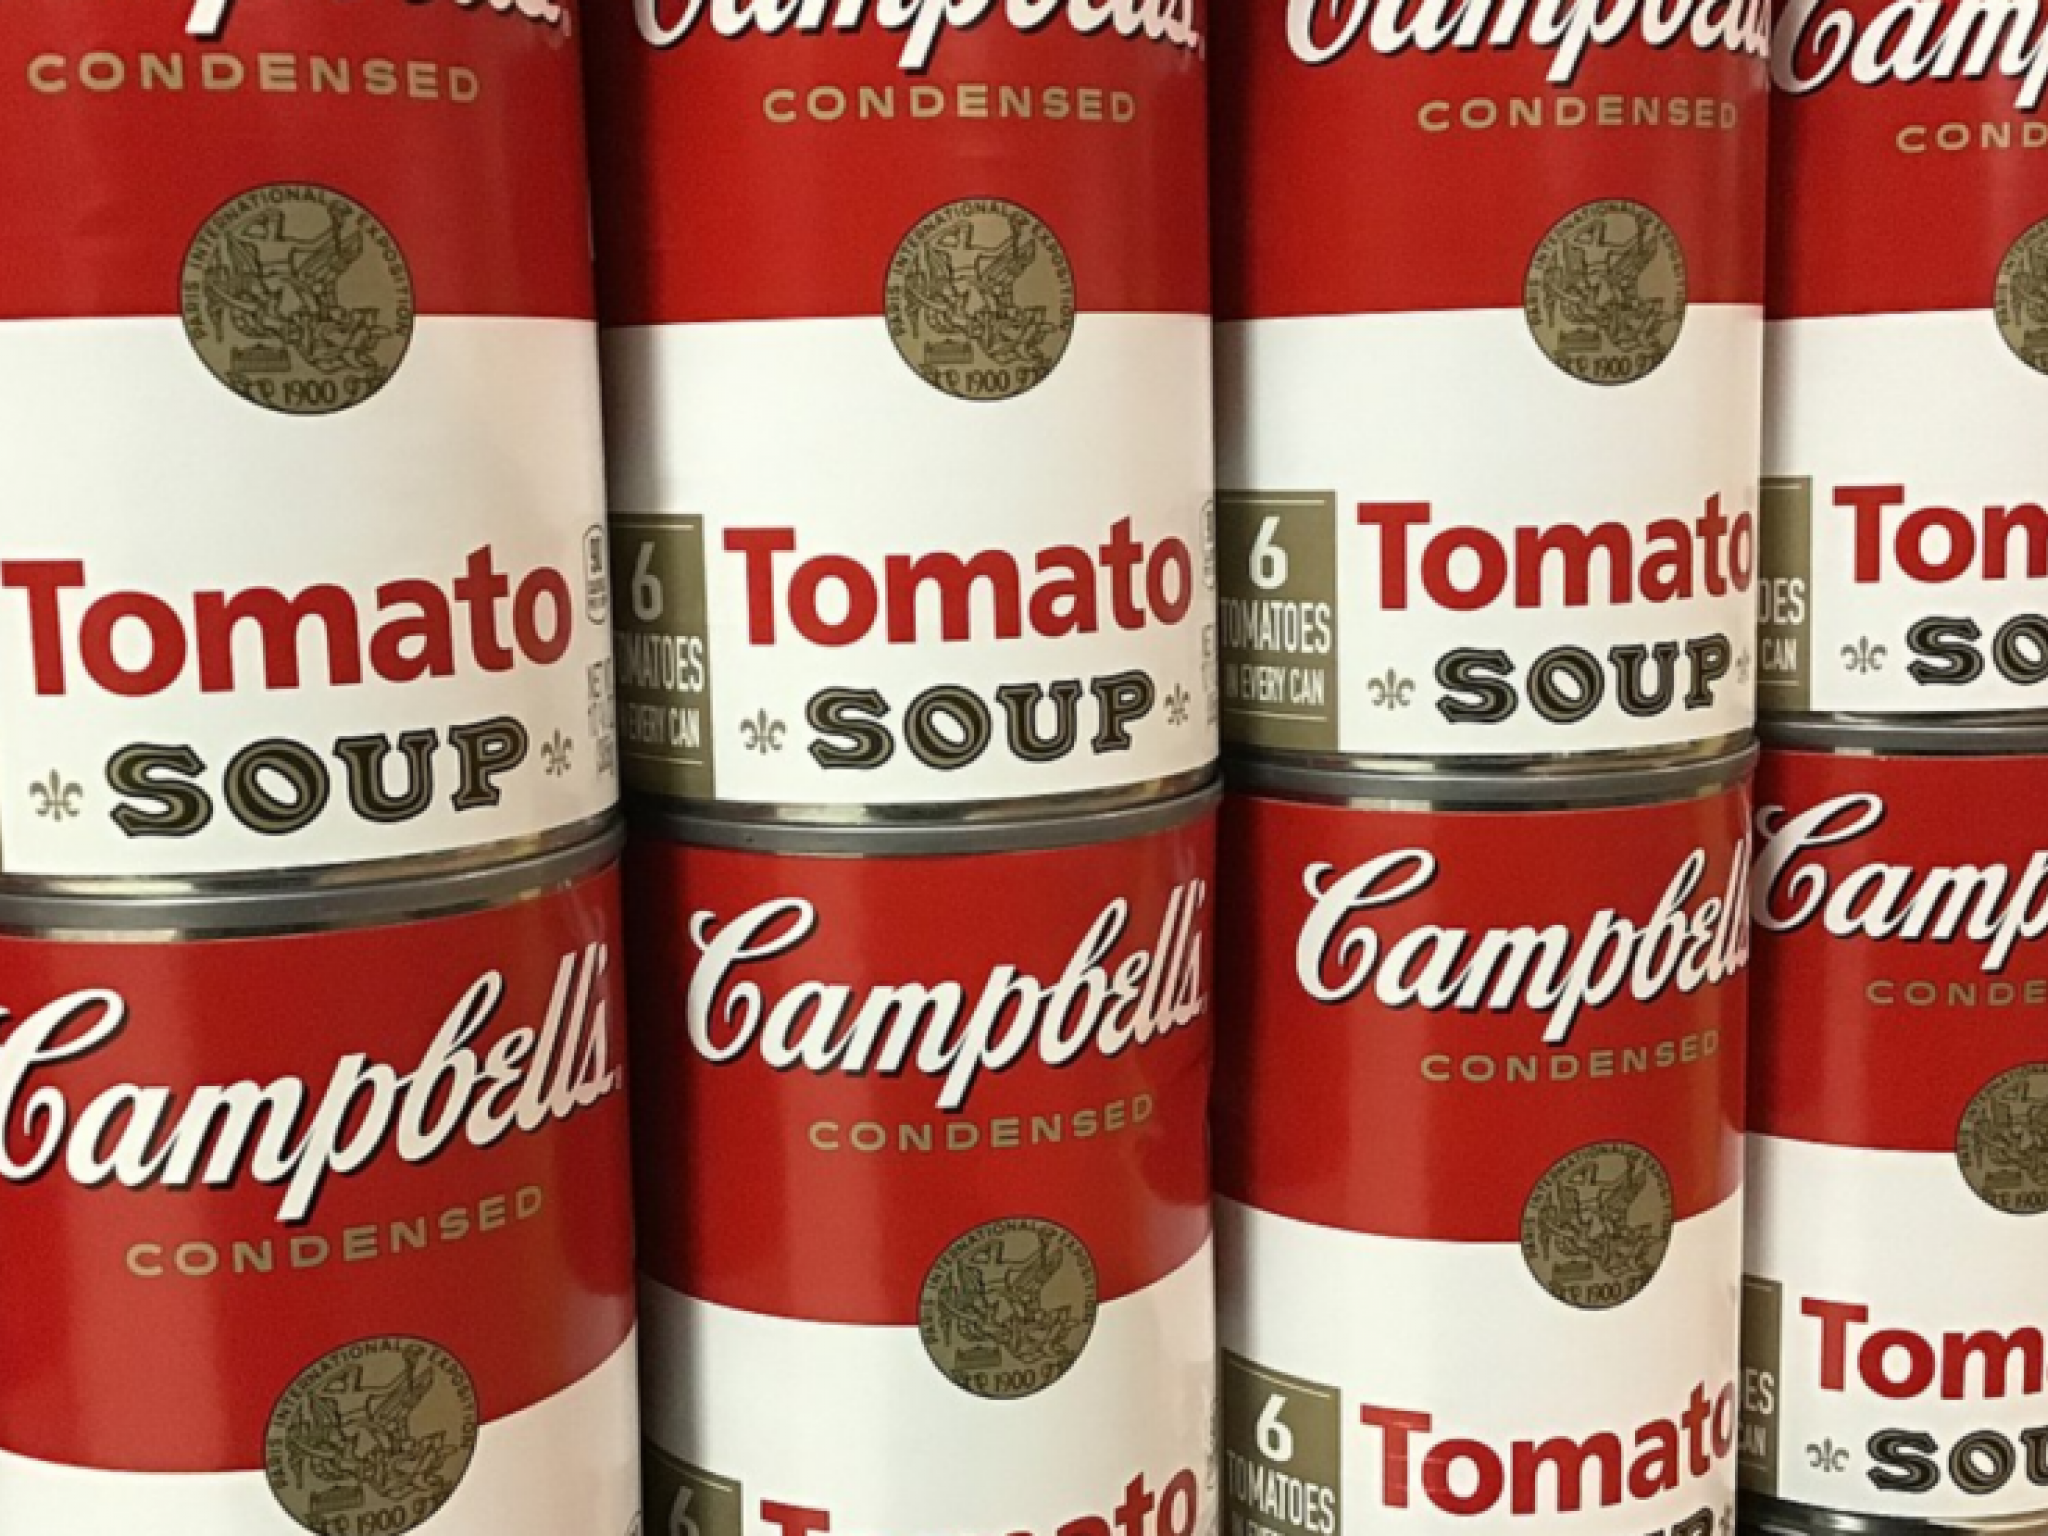  canned-soup-products-maker-campbell-cuts-415-jobs-details 